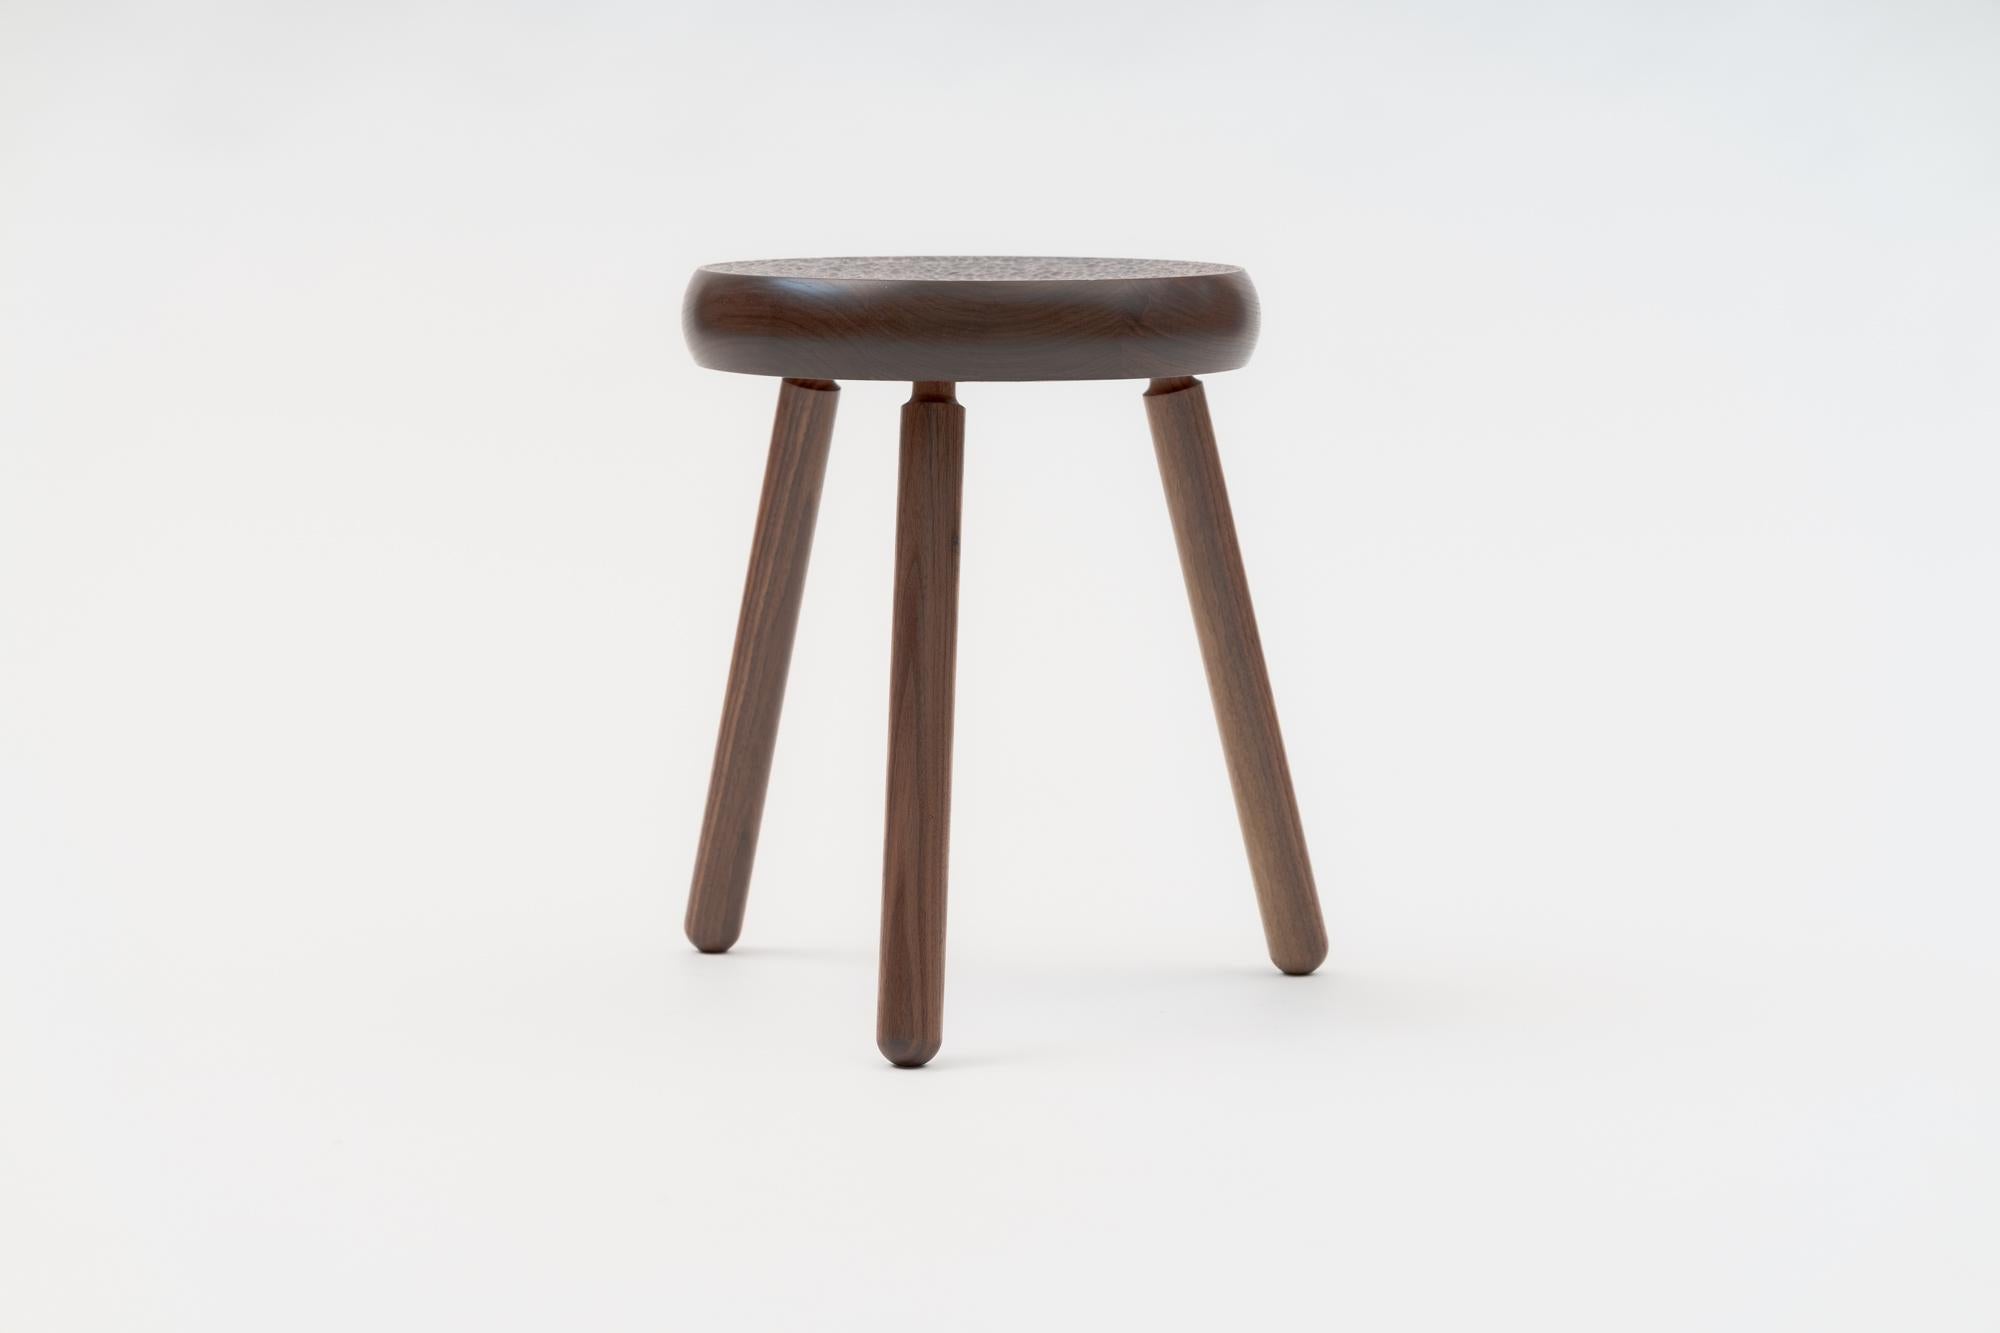 A versatile piece of furniture, the Dibbet Stool functions as an extra seat, ottoman, or side table. Reminiscent of Shaker or early frontier furniture, the thick seat is hand carved with a slight concave that leaves a tactile and smooth texture. The